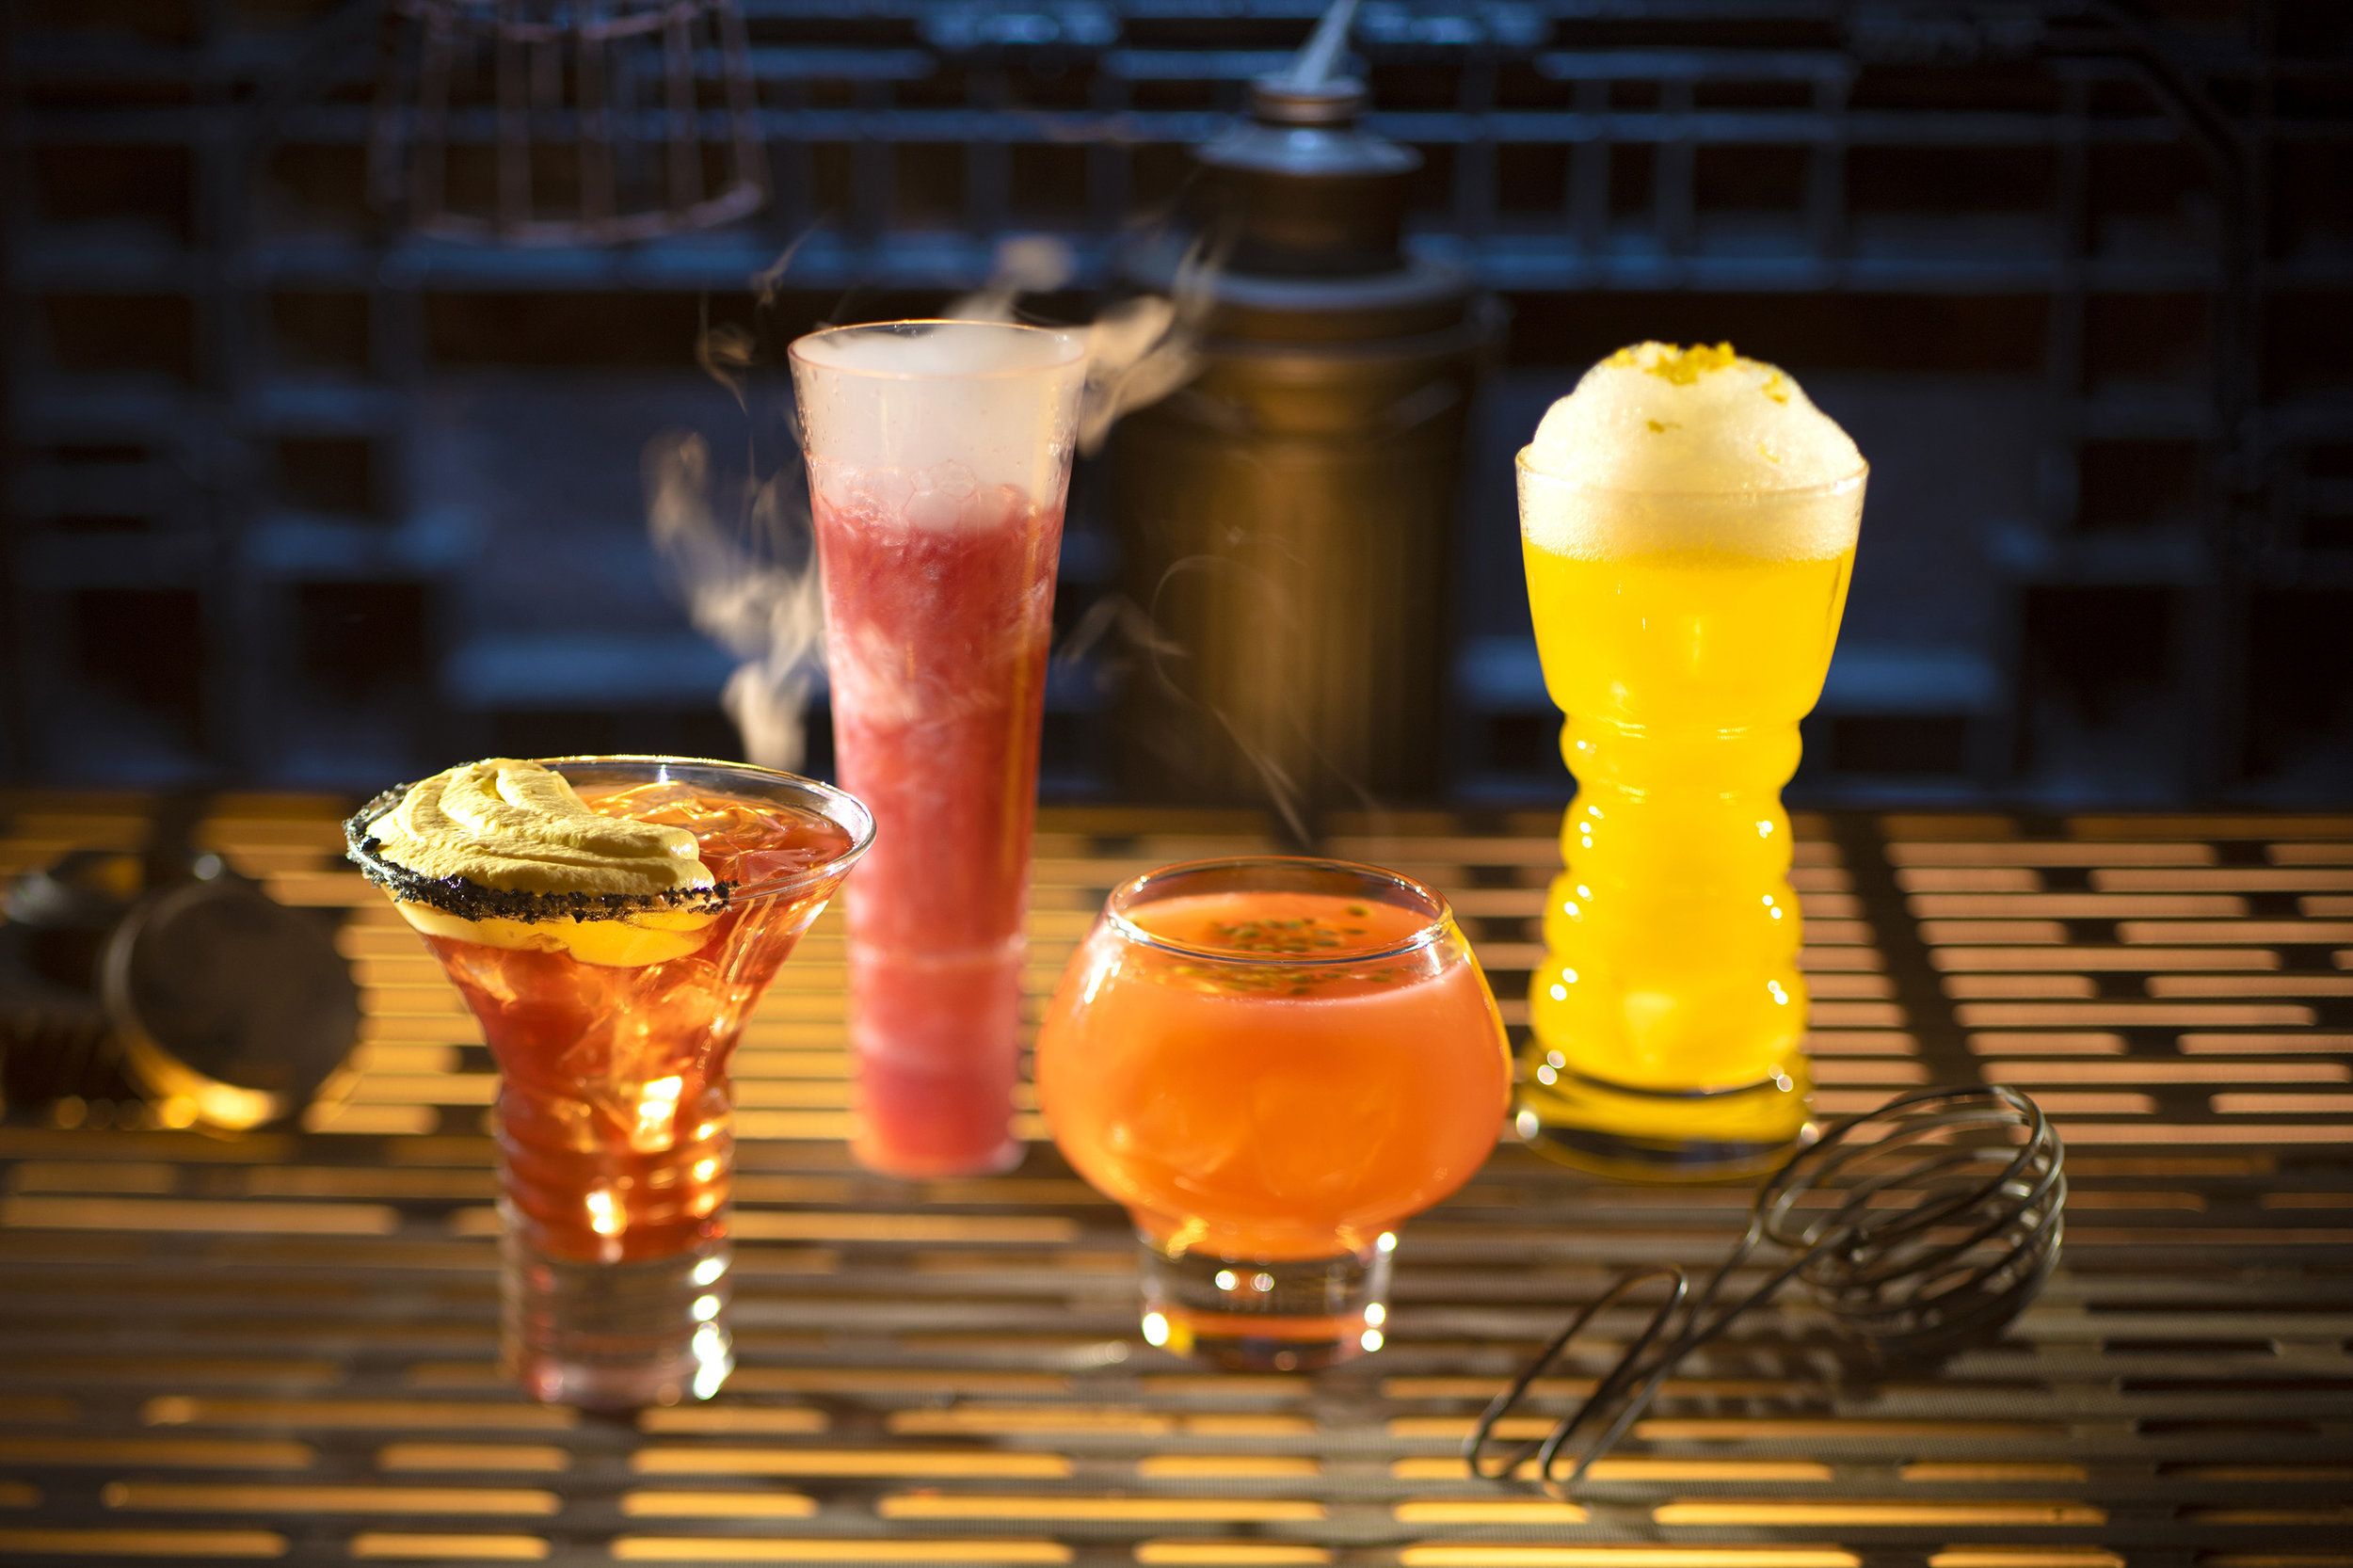  Guests will discover innovative and creative concoctions from around the galaxy at Star Wars: Galaxy's Edge at Disneyland Park in Anaheim, California and at Disney's Hollywood Studios in Lake Buena Vista, Florida. From left to right, alcoholic bever